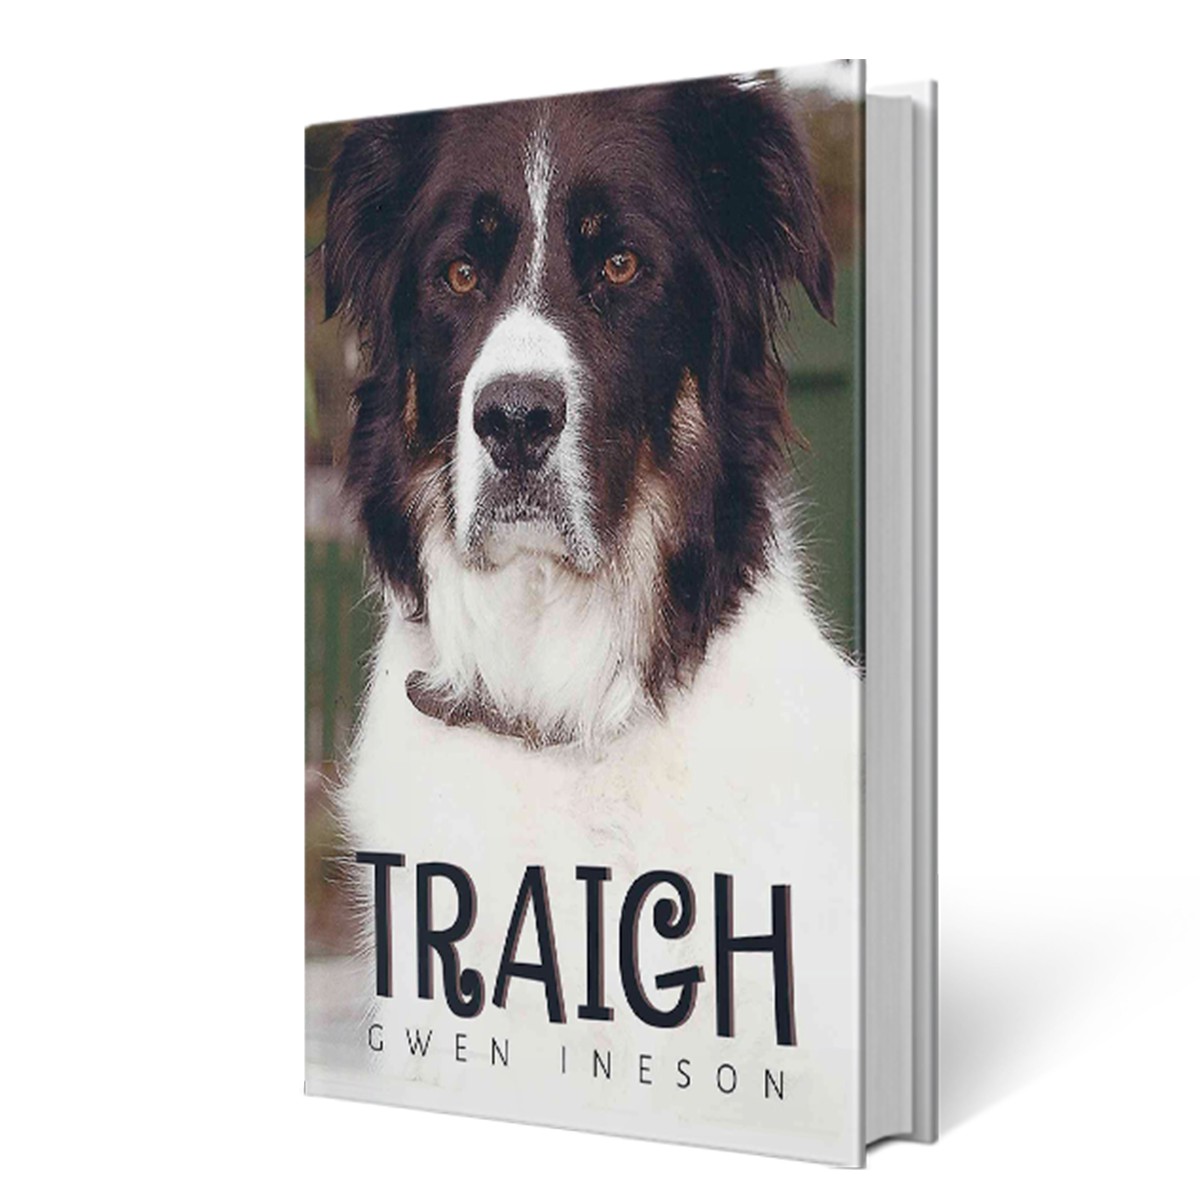 The Oban Times Reviewed the Book Traigh by Gwen Ineson